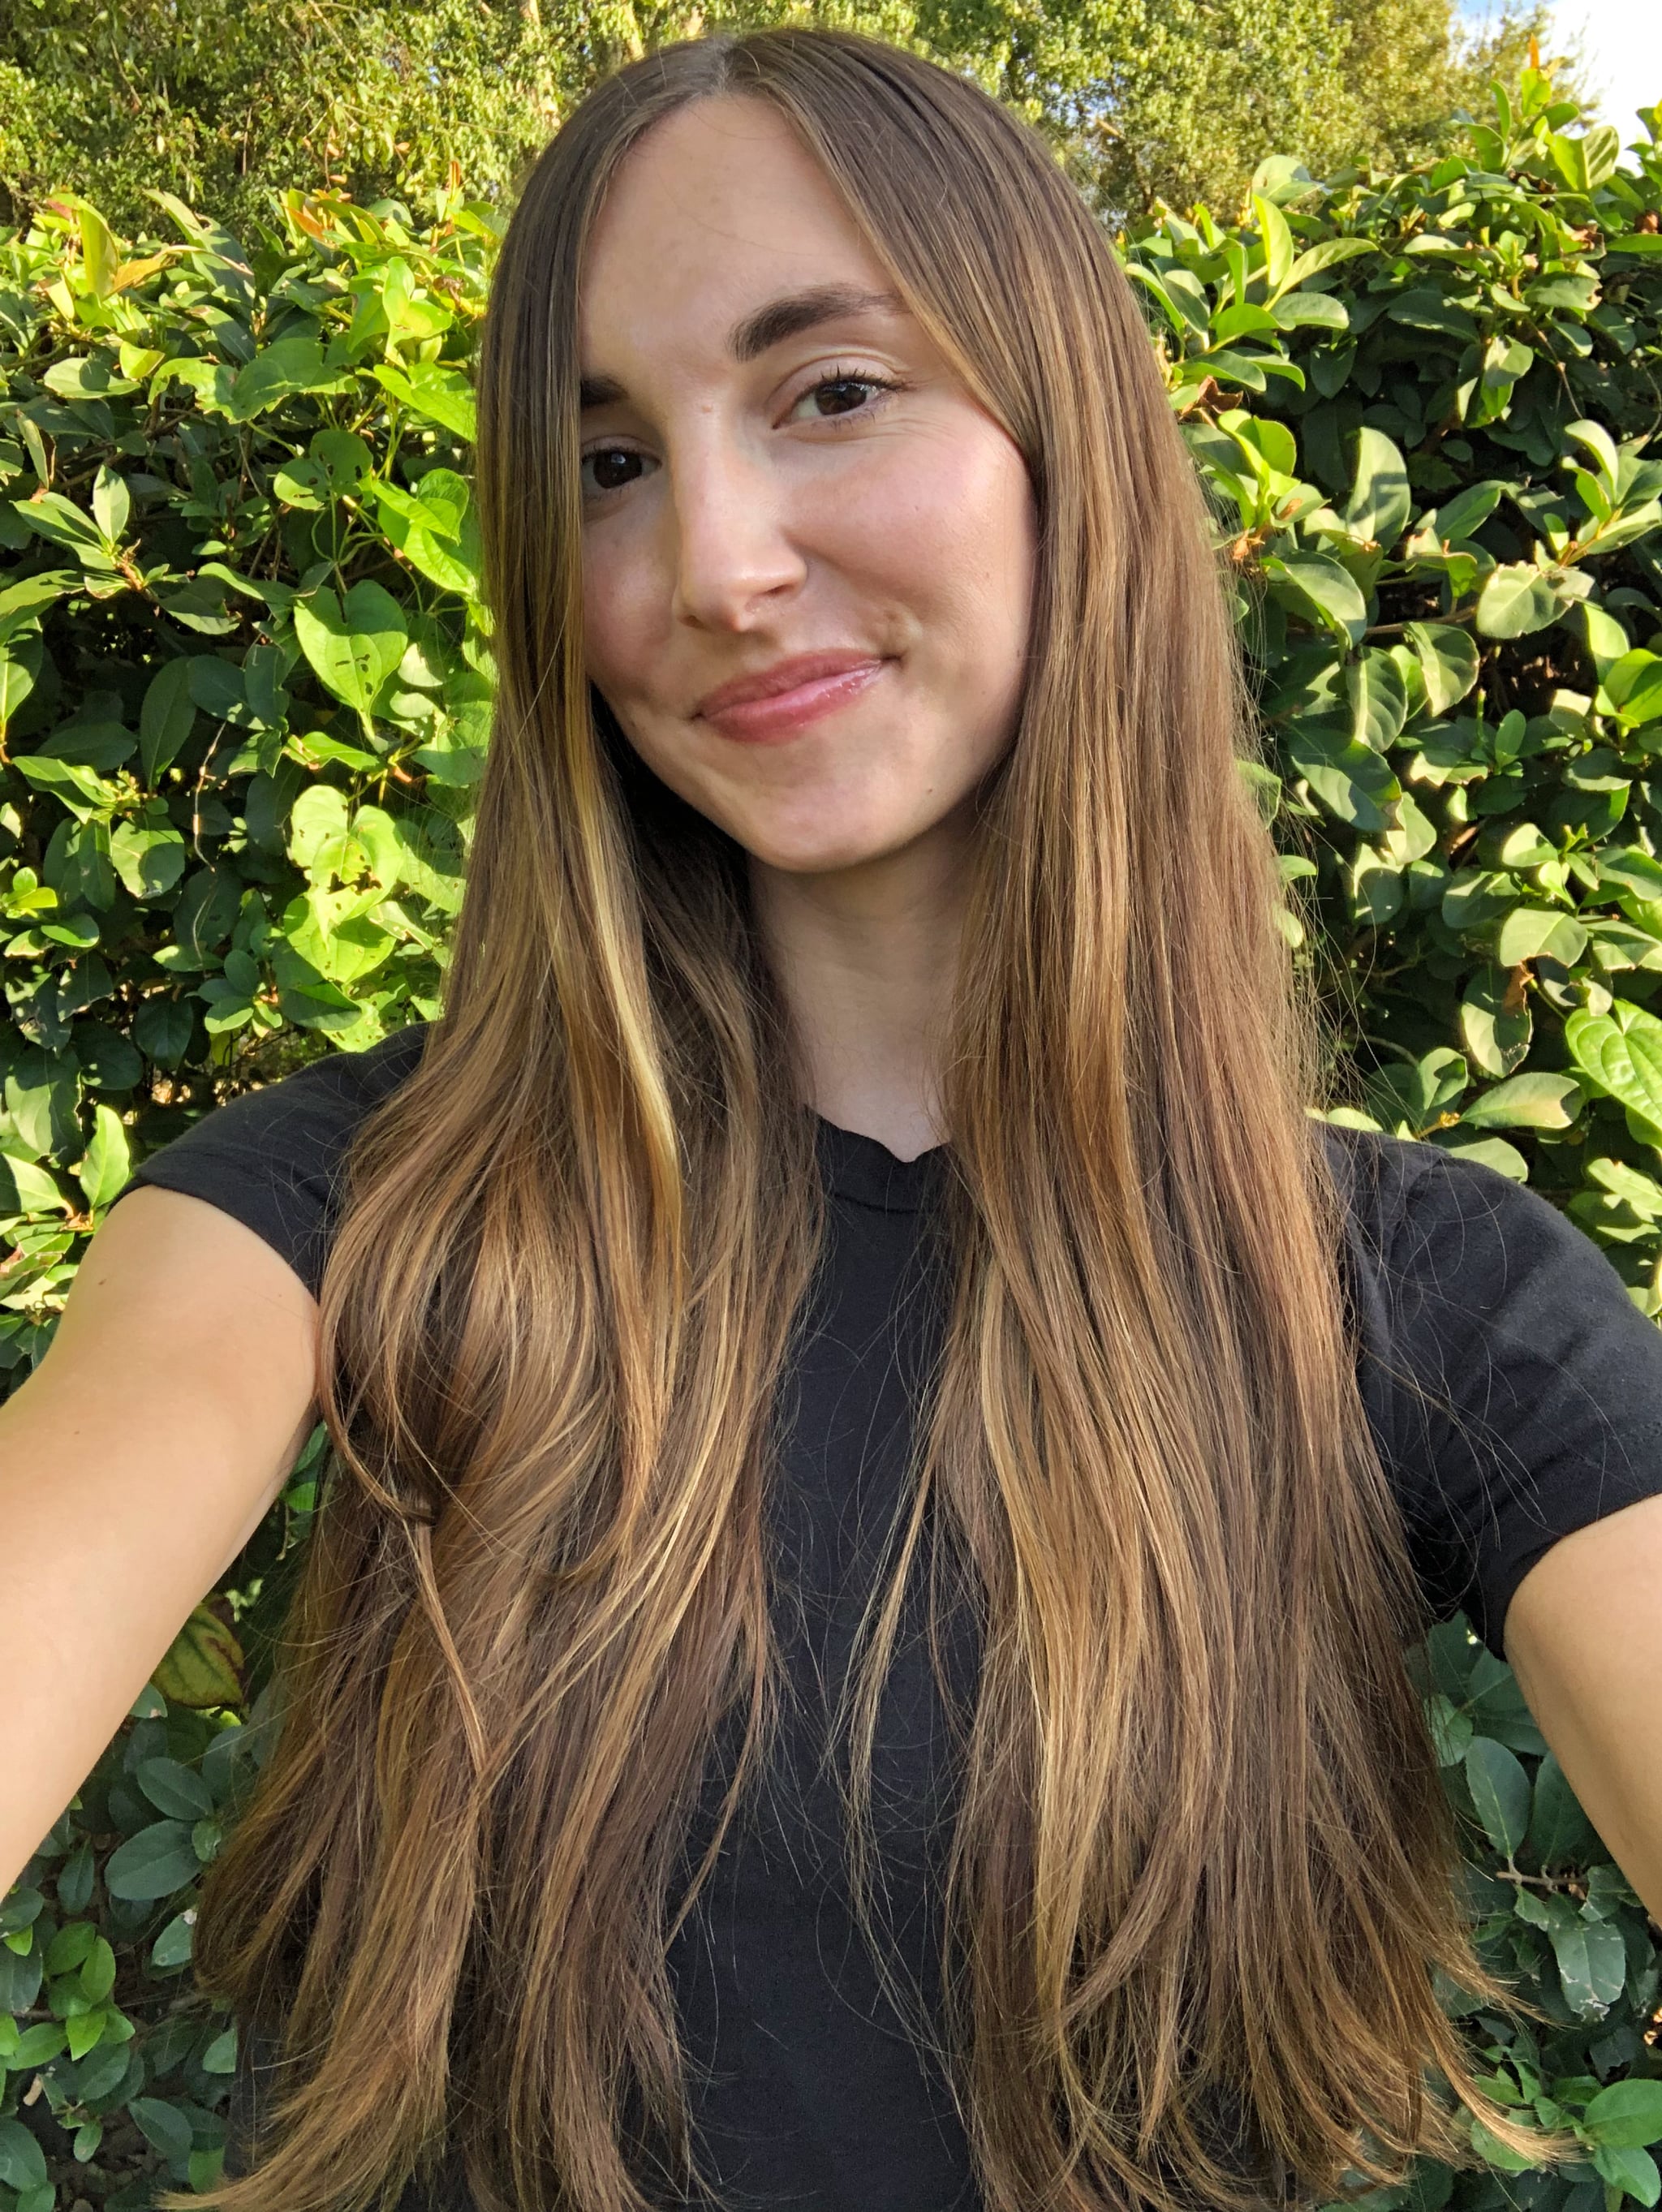 POPSUGAR Editor Victoria Messina shares the effects of Herbal Essences' new Smoothing Air Dry Cream on her hair.